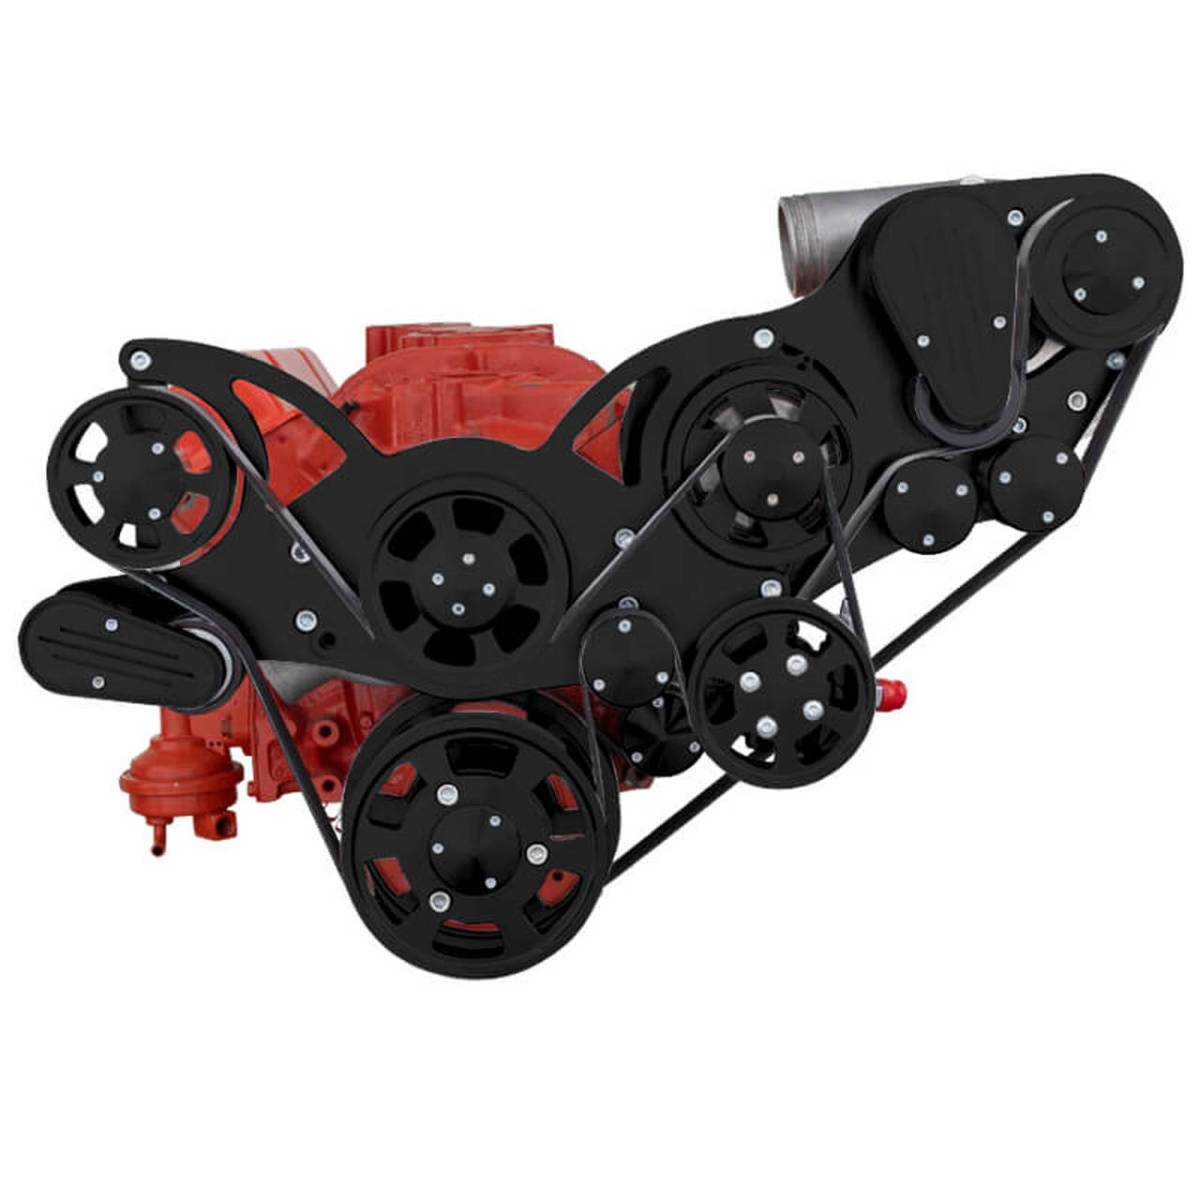 CVF Racing - CVF Wraptor Chevy Small Block Procharger Serpentine Bracket System with AC and Alternator - Black - Image 1